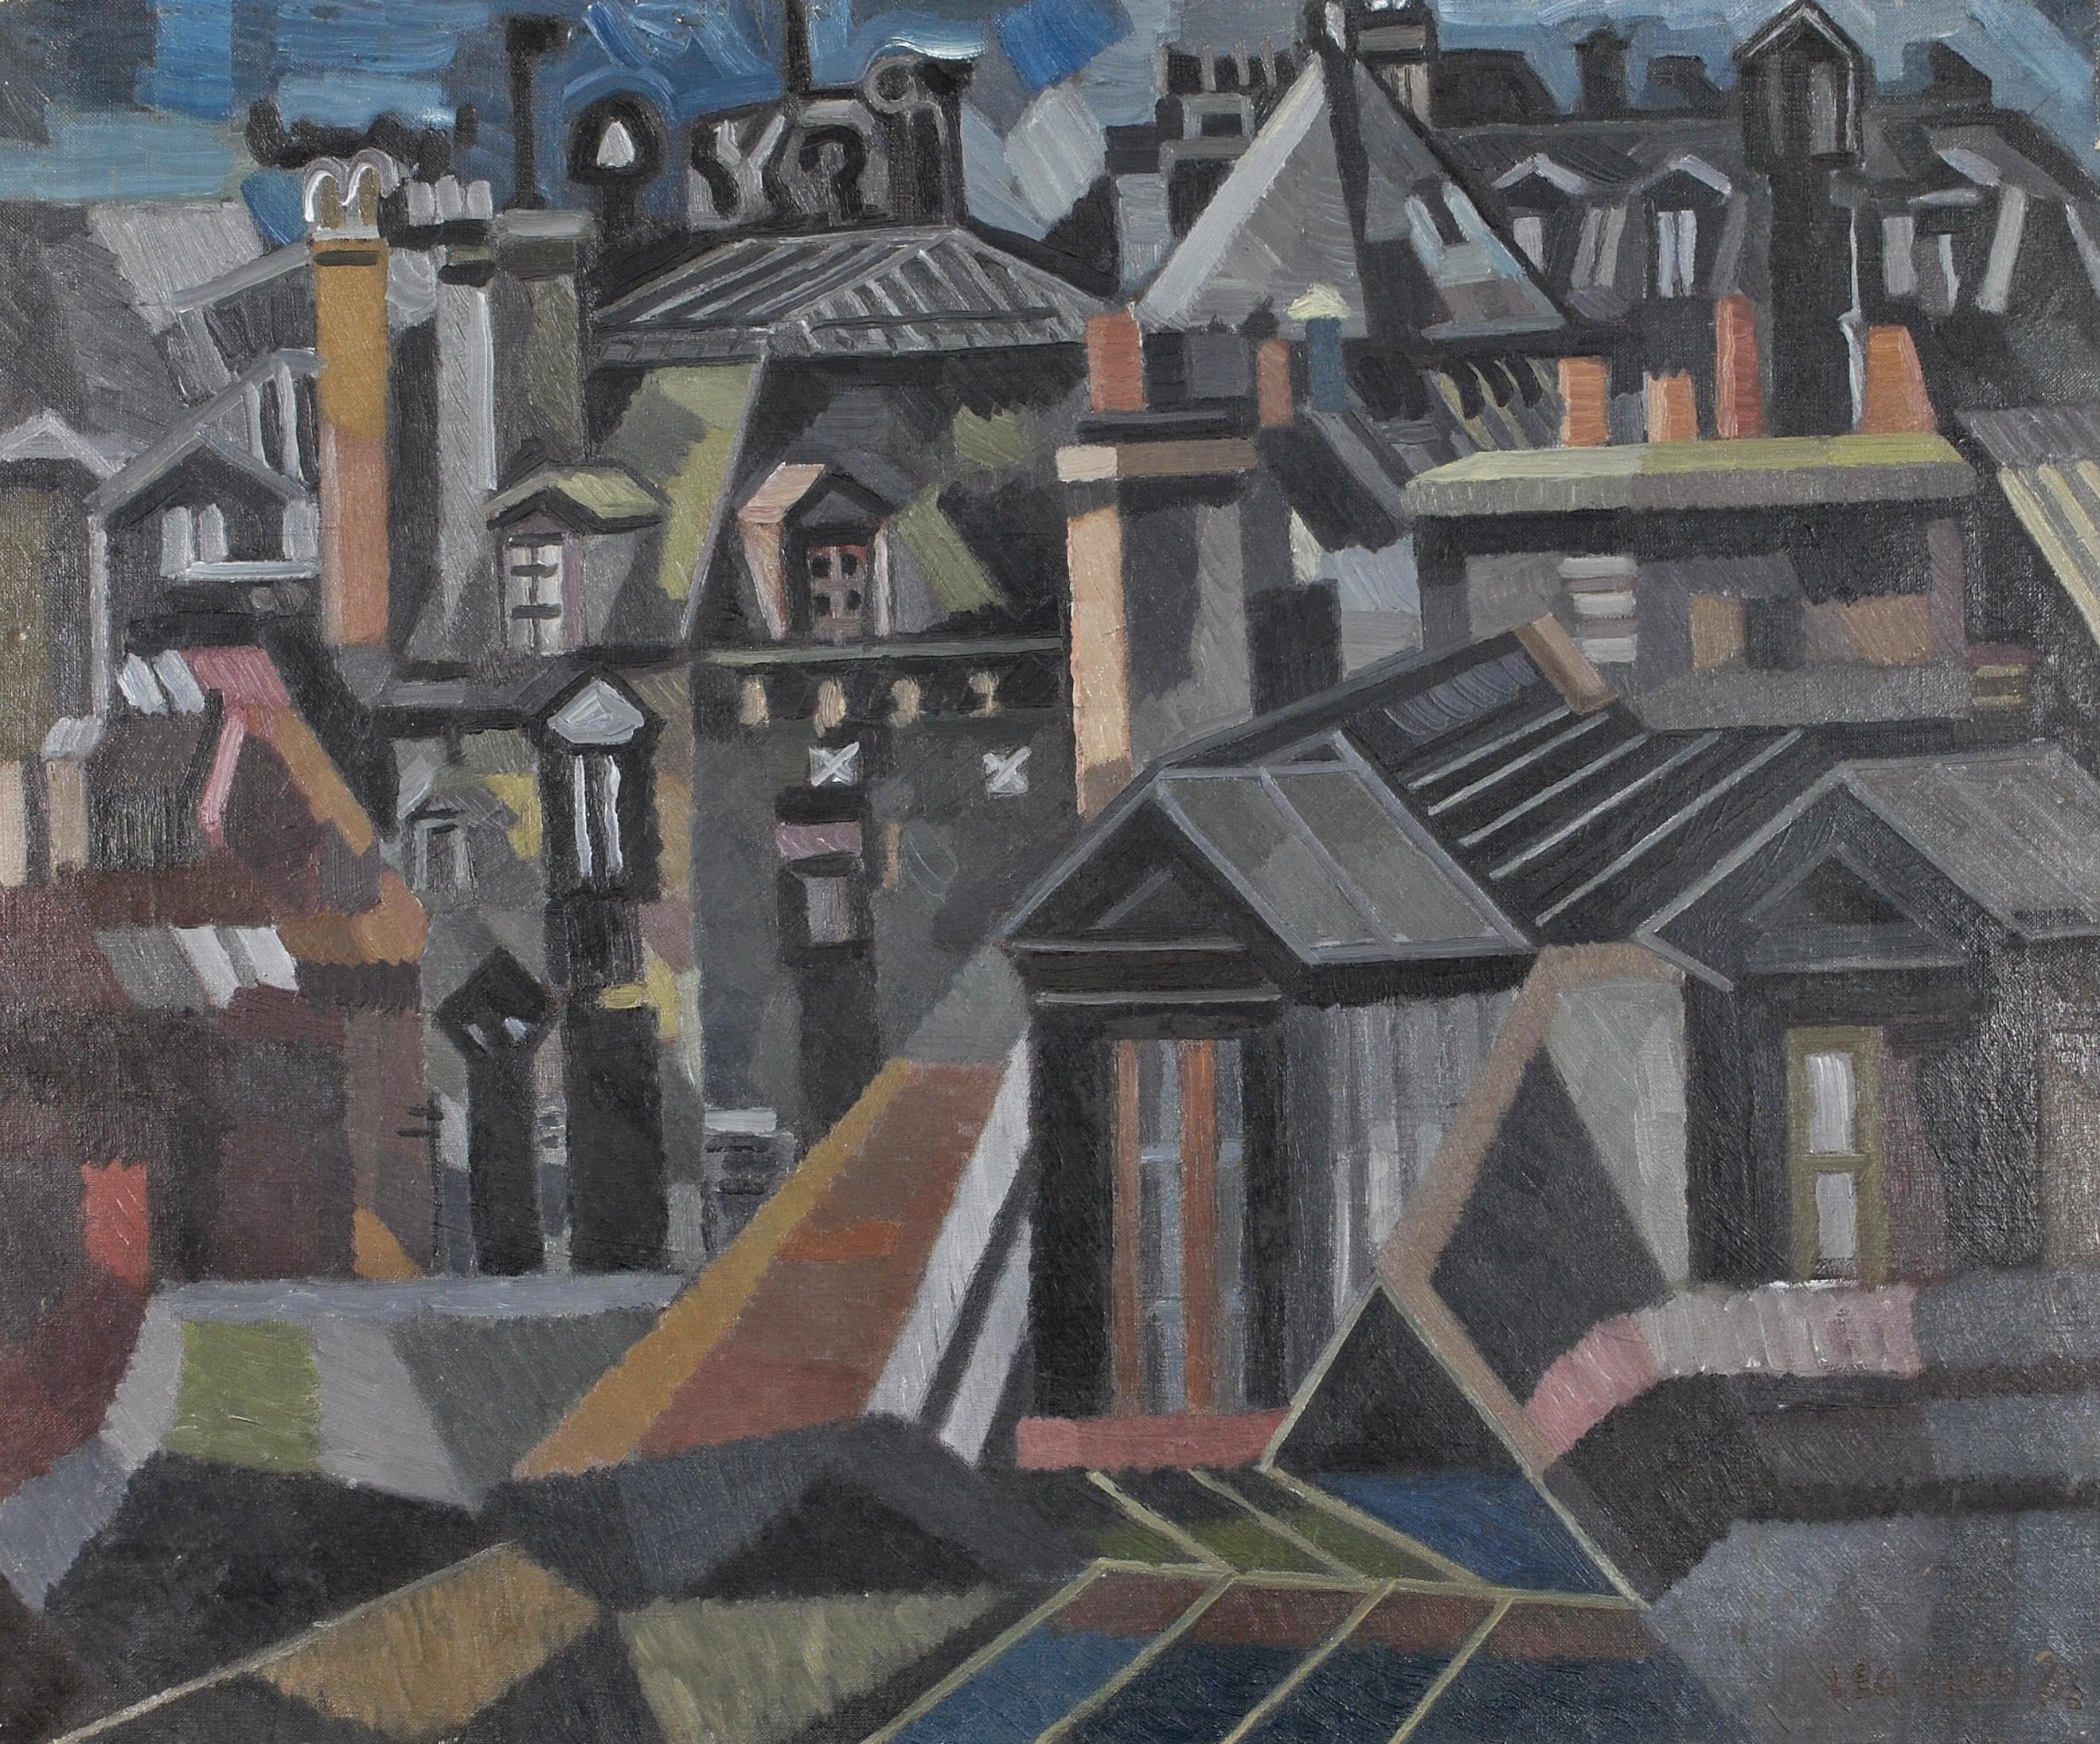 A beautiful signed and dated 1963 French cubist oil on canvas depicting Paris rooftops. Signature in bottom right corner is indistinct. A lovely painting in excellent condition.

Artist: French School, mid 20th century
Title: Paris Rooftops
Medium: